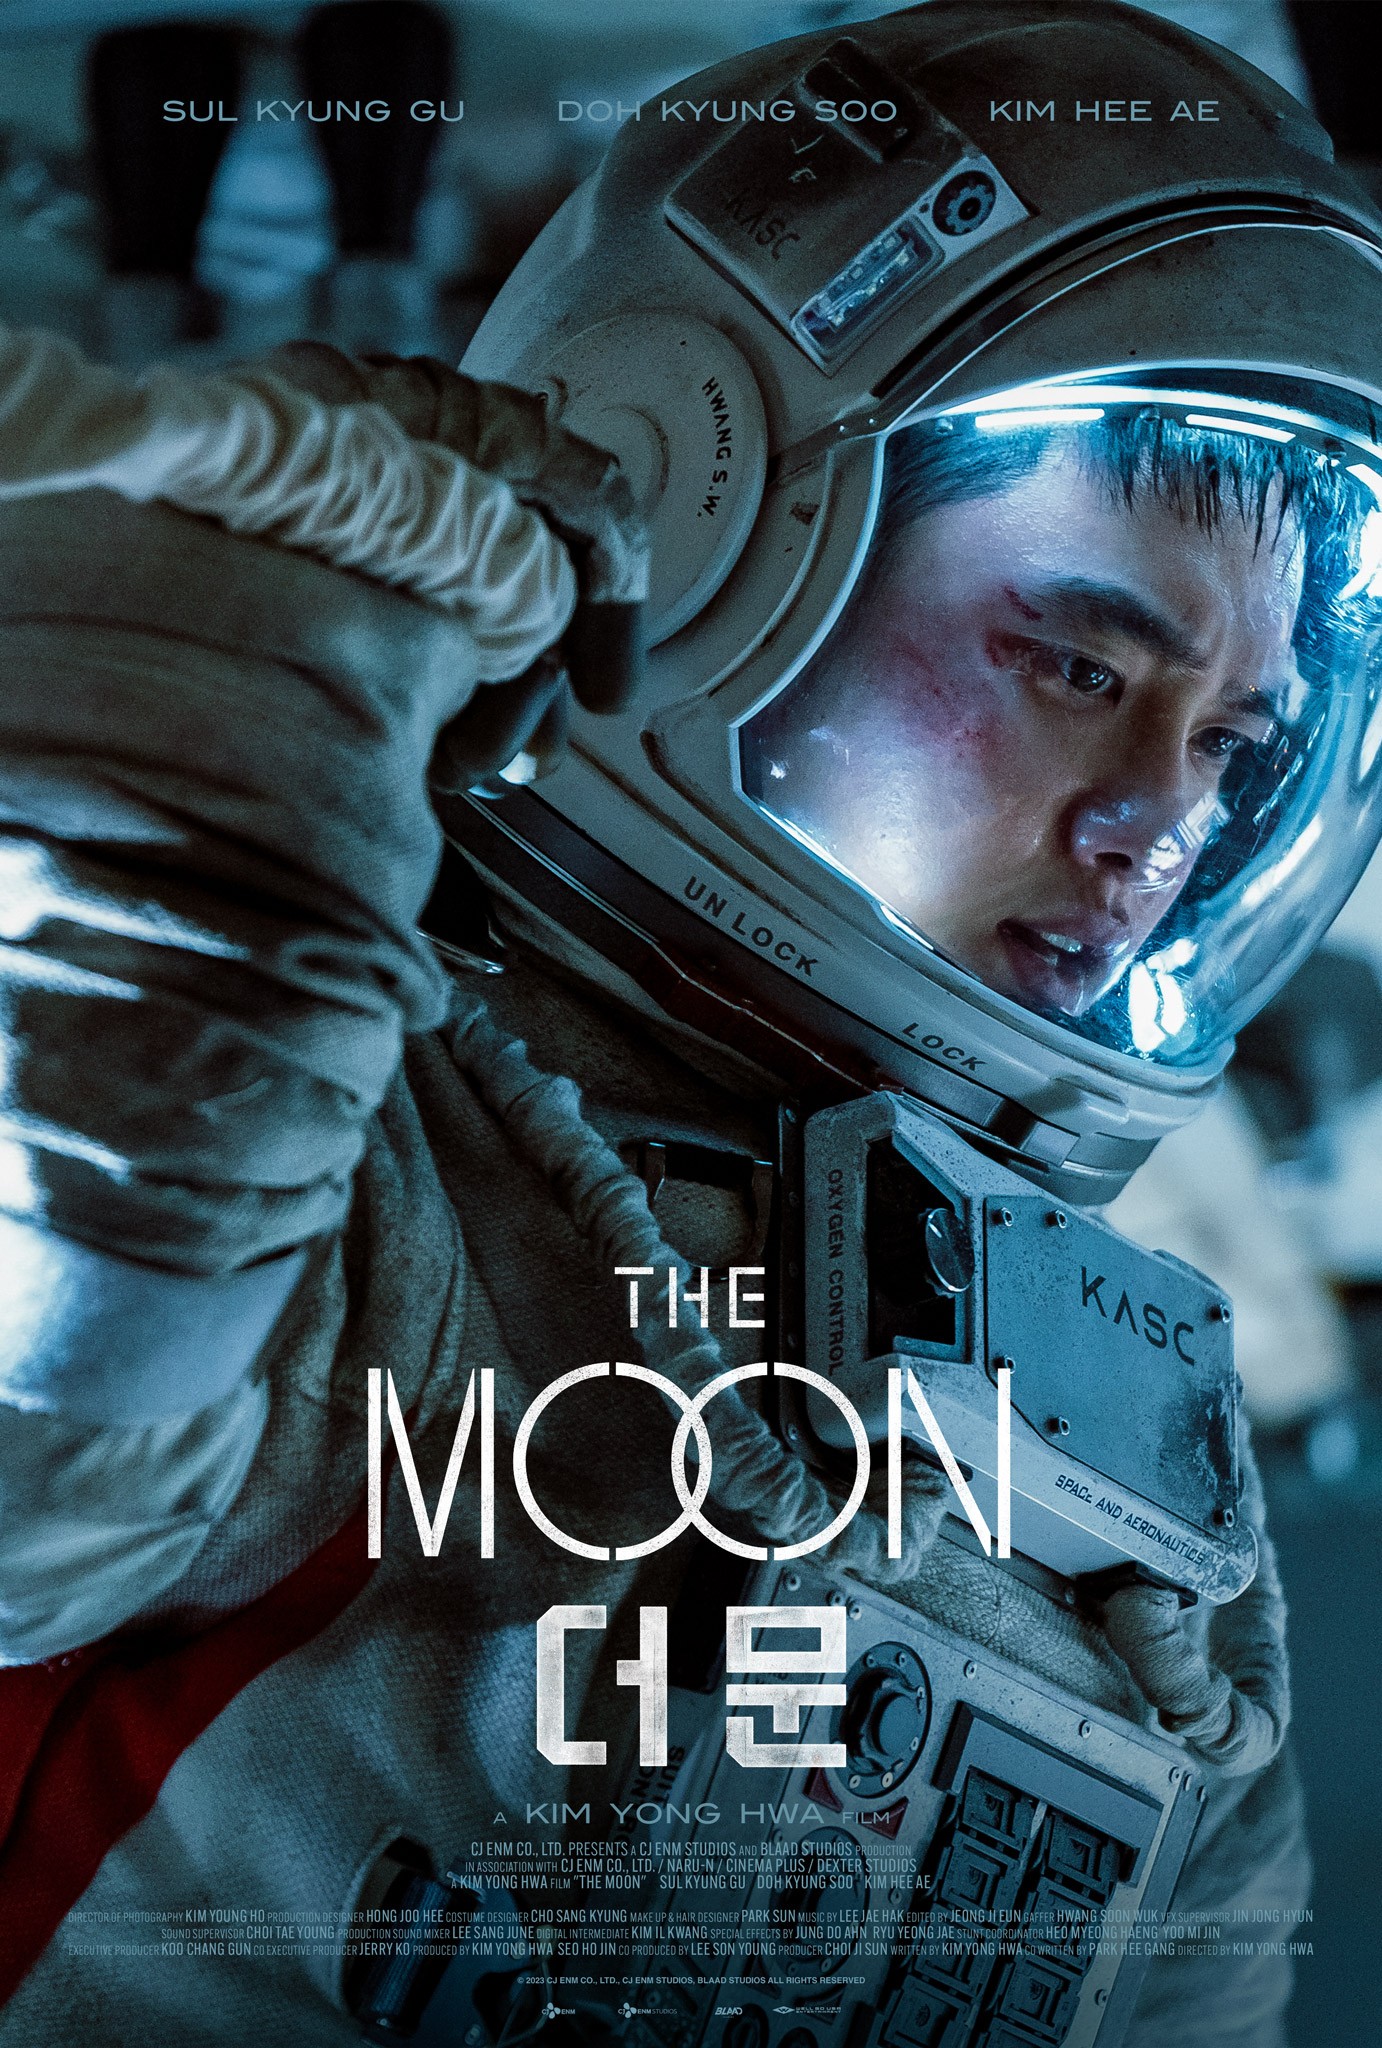 The Moon Pictures Rotten Tomatoes